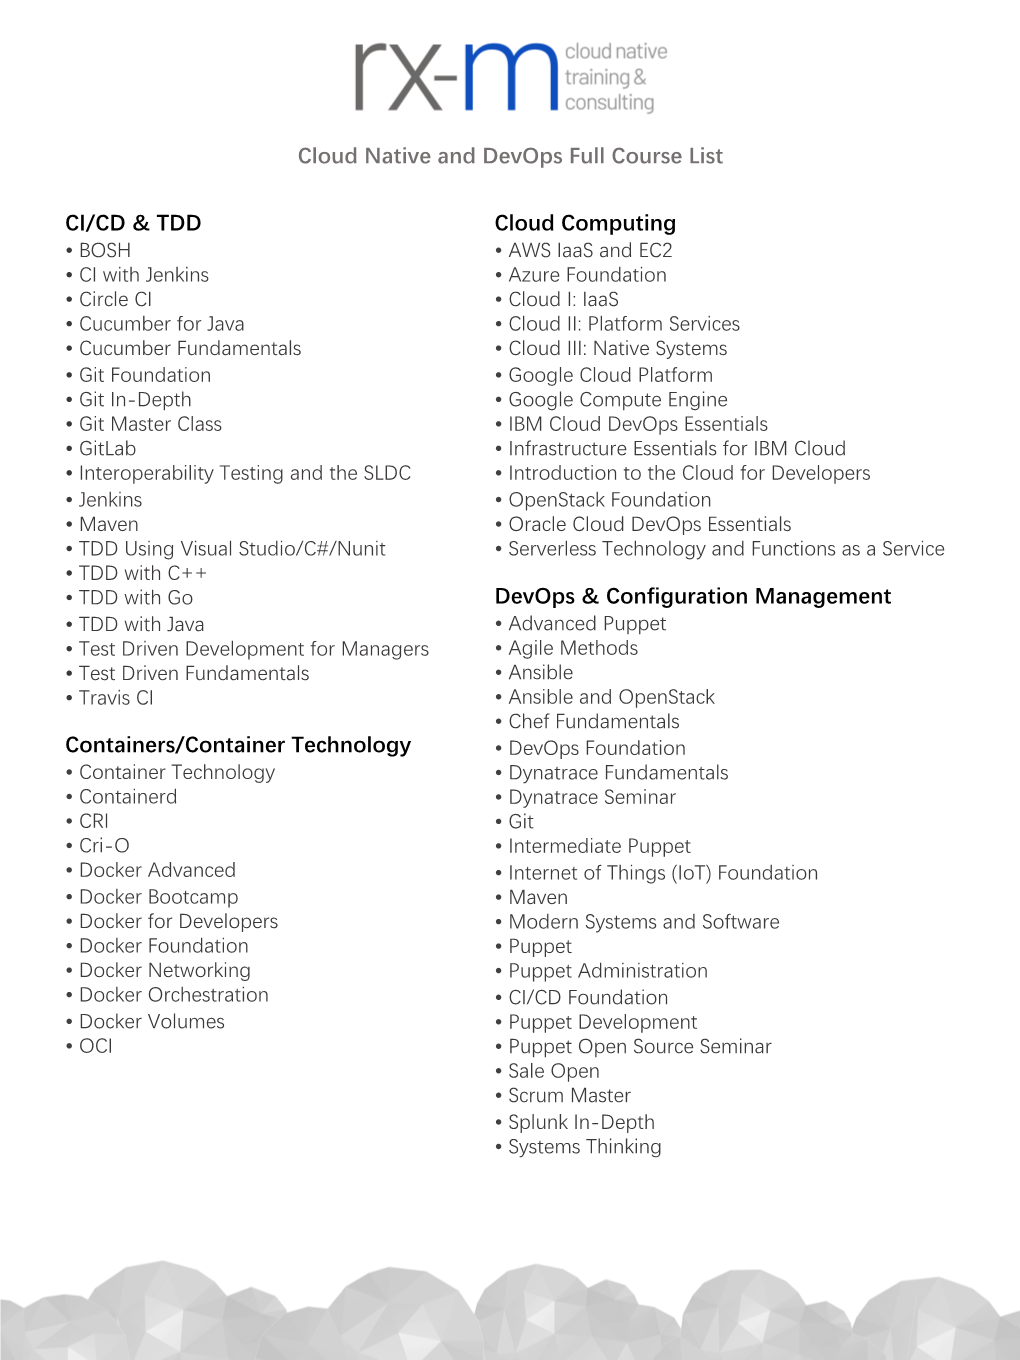 CI/CD & TDD Cloud Computing Containers/Container Technology